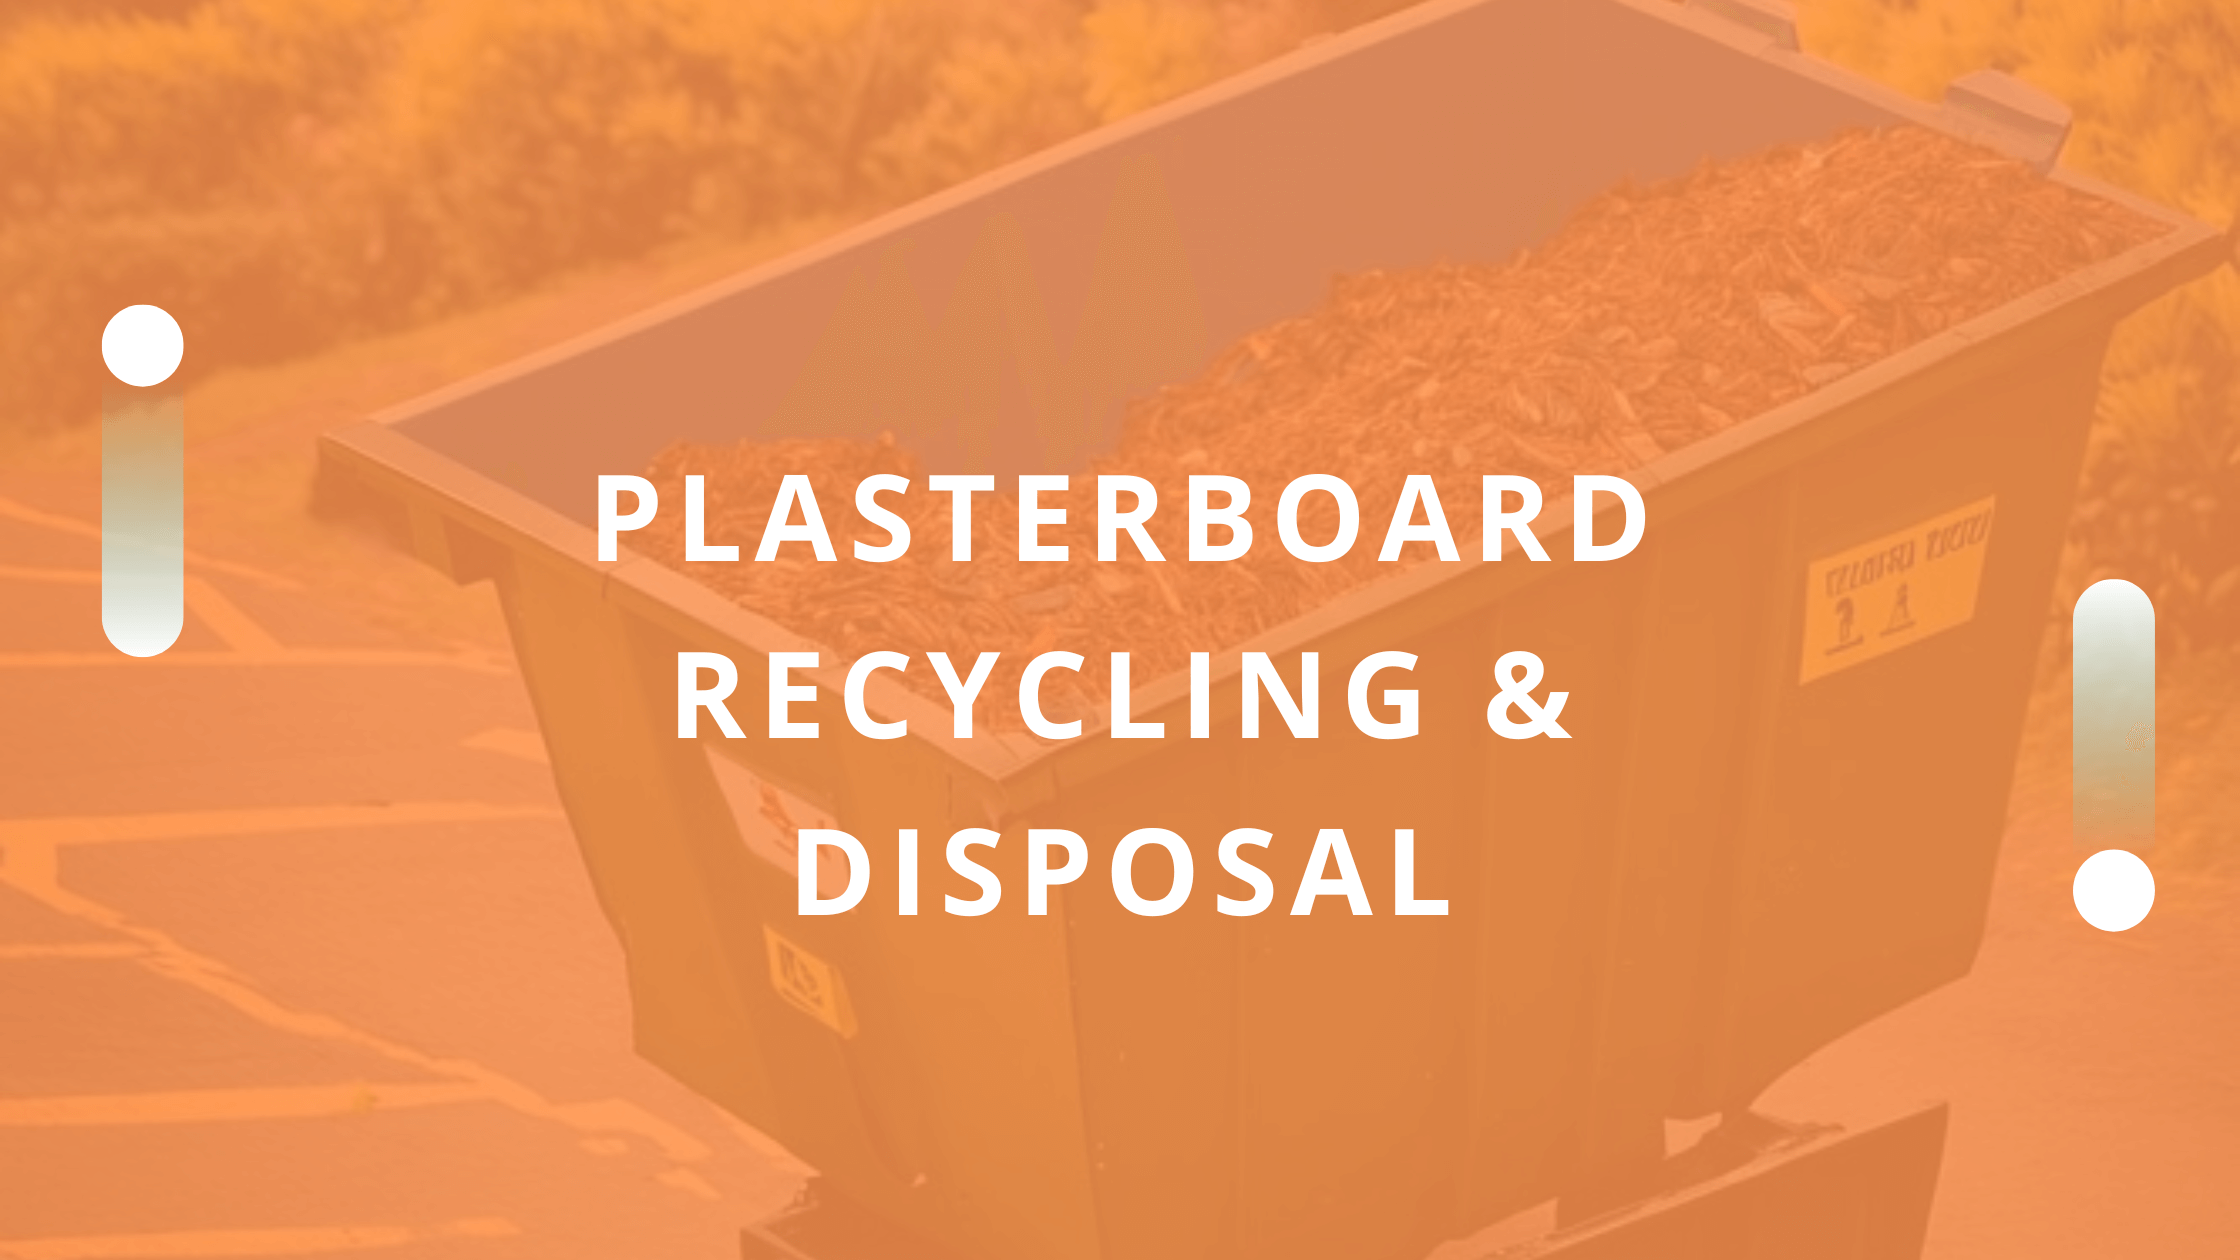 Plasterboard Recycling & Disposal